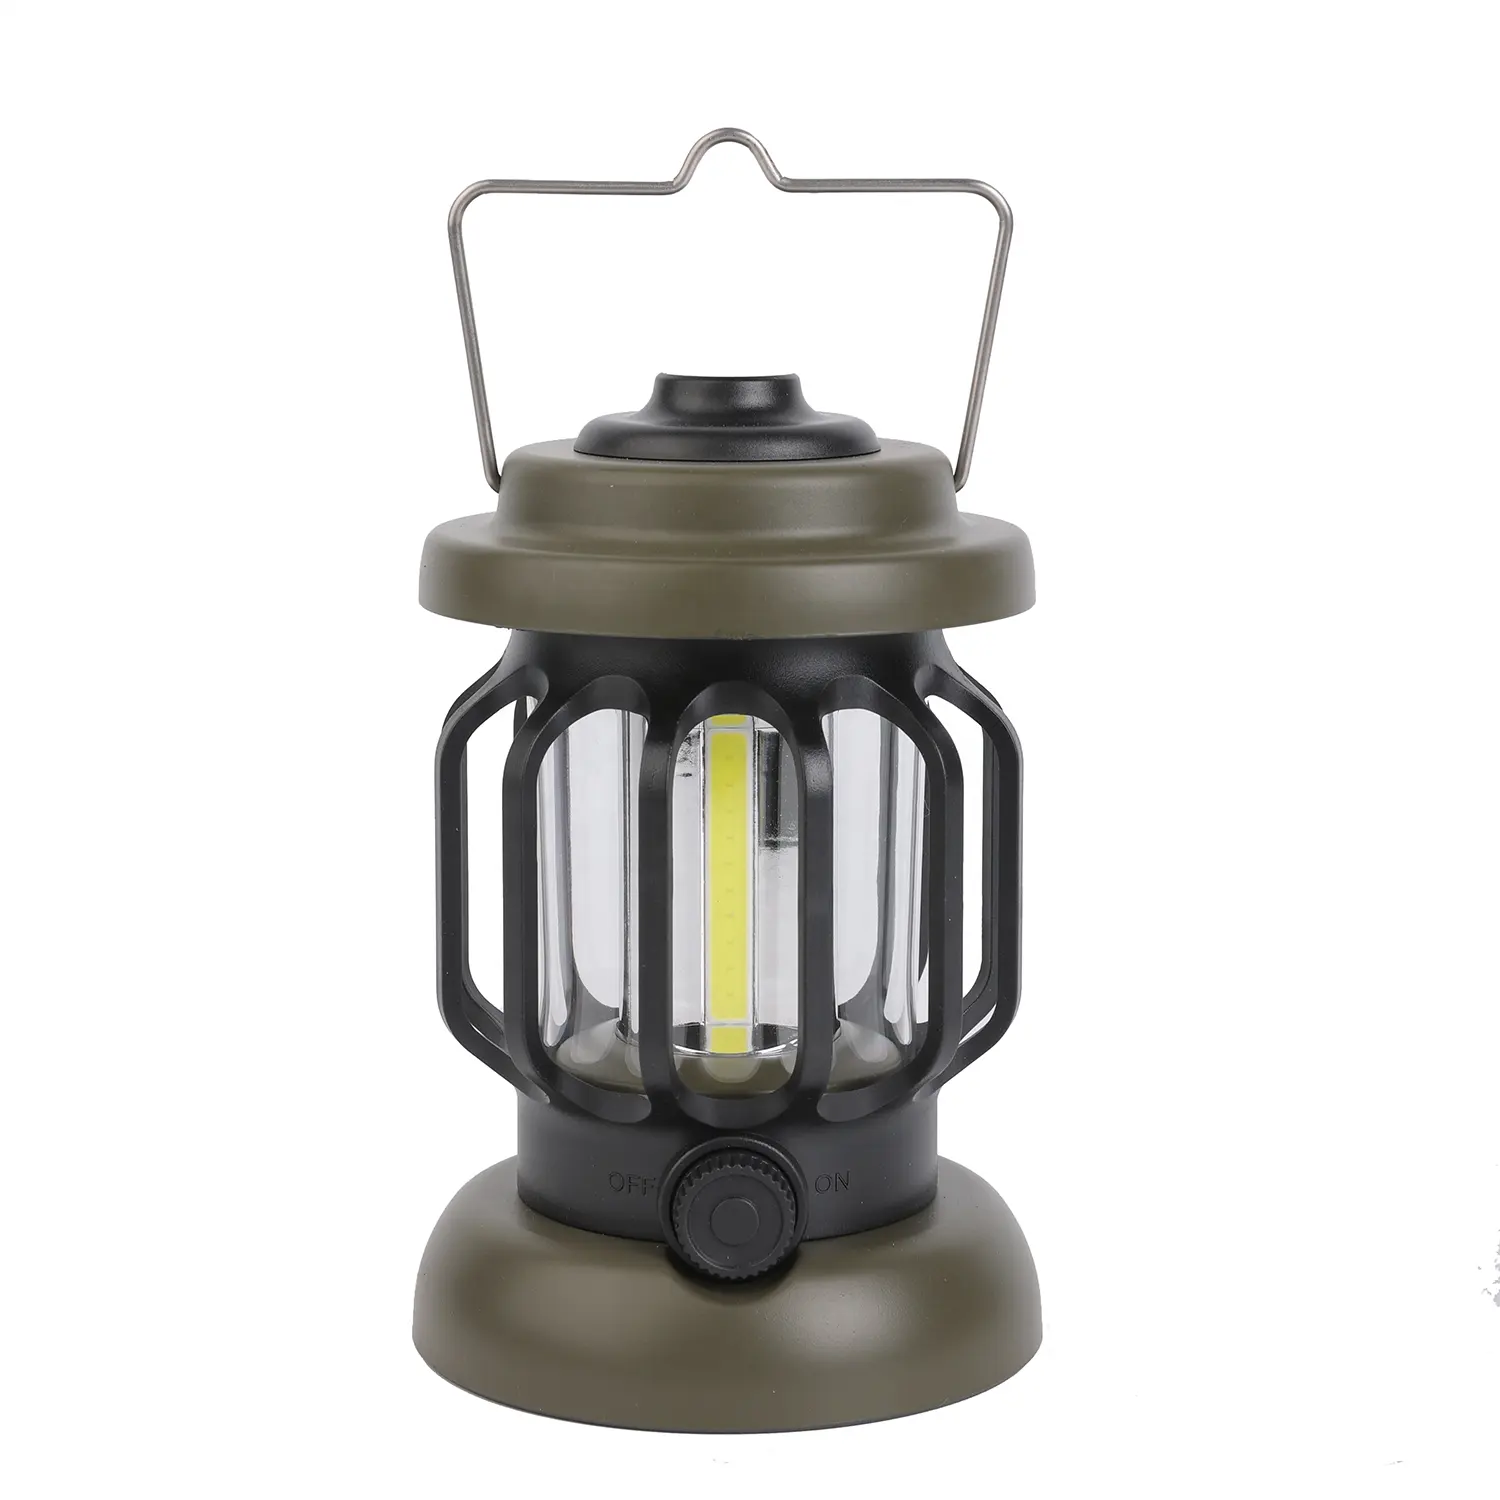 Hot Selling Outdoor Bright camping lanterns Portable Survival Battery Powered Ajustable Emergency light COB Camping Light